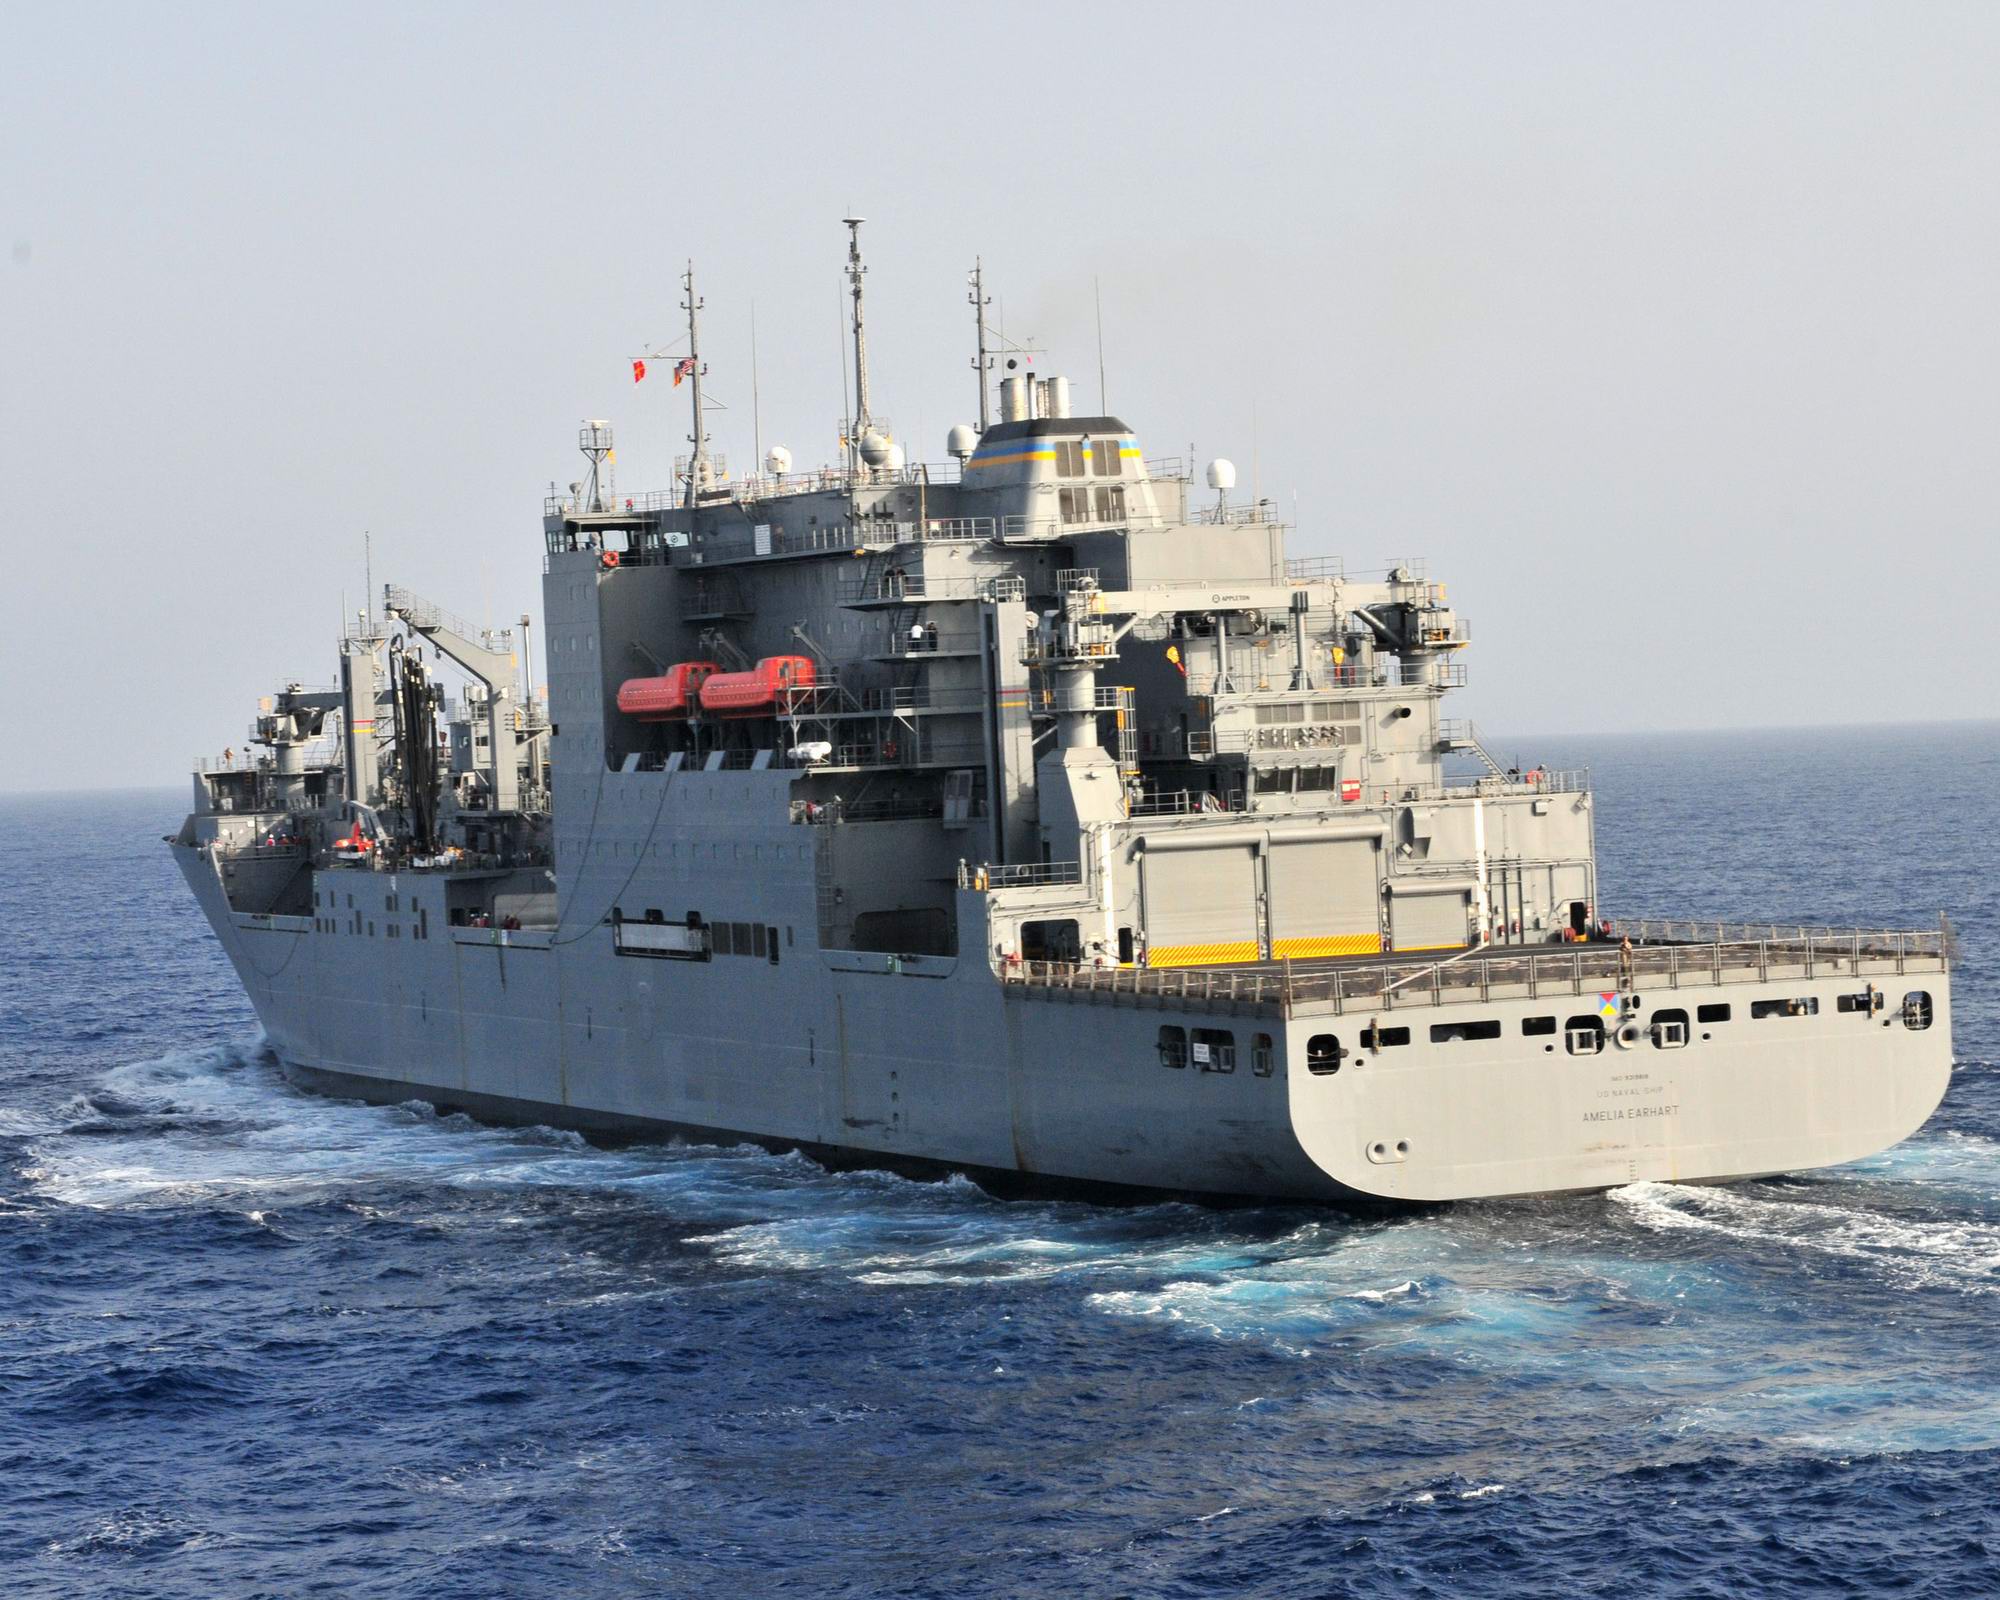 USNS Amelia Earhart (T-AKE-6) prepares for a replenishment at sea with the USS Bataan (LHD-5) - October 4 2009 - photo Chief Mass Communication Specialist Tony Sisti, USN.jpg